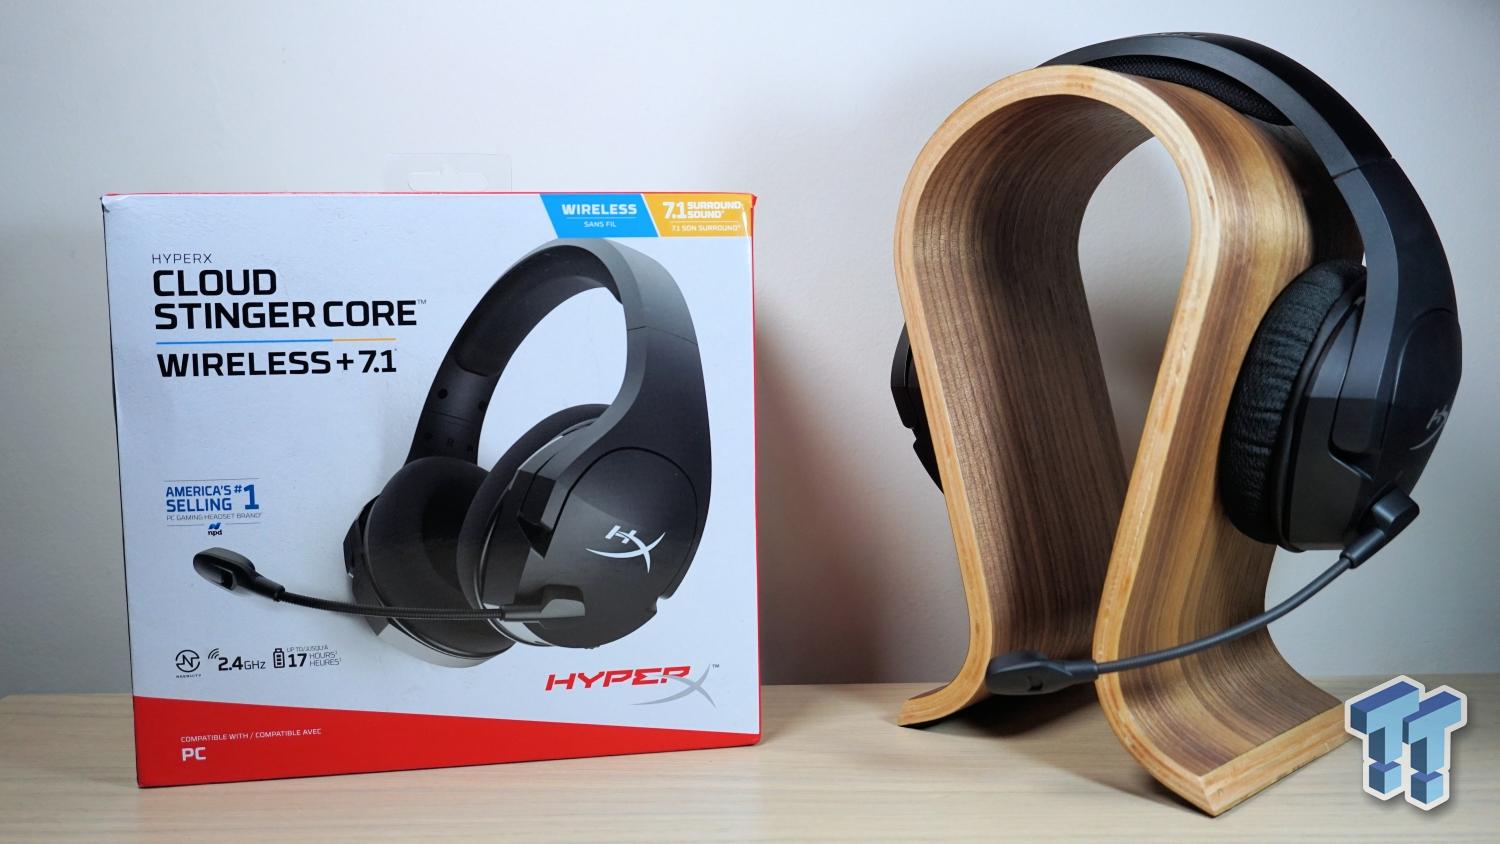 HyperX Cloud Stinger Wireless 7.1 Gaming Headset Review